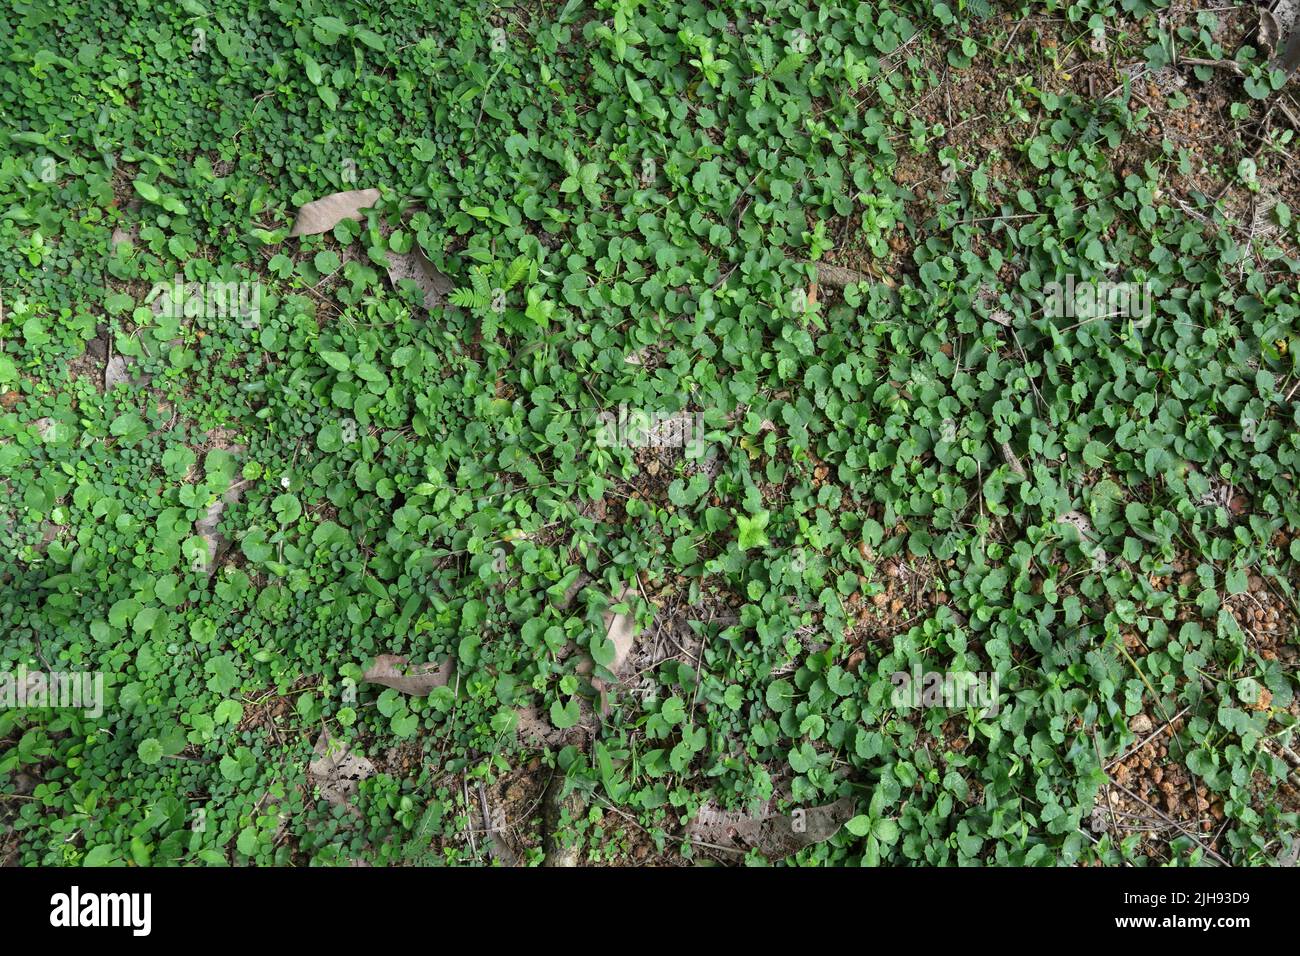 Overhead view of wild grown Indian penny-wort or Gotu kola (Centella asiatica) plants with creeping tick trefoil plants and several grass plants Stock Photo